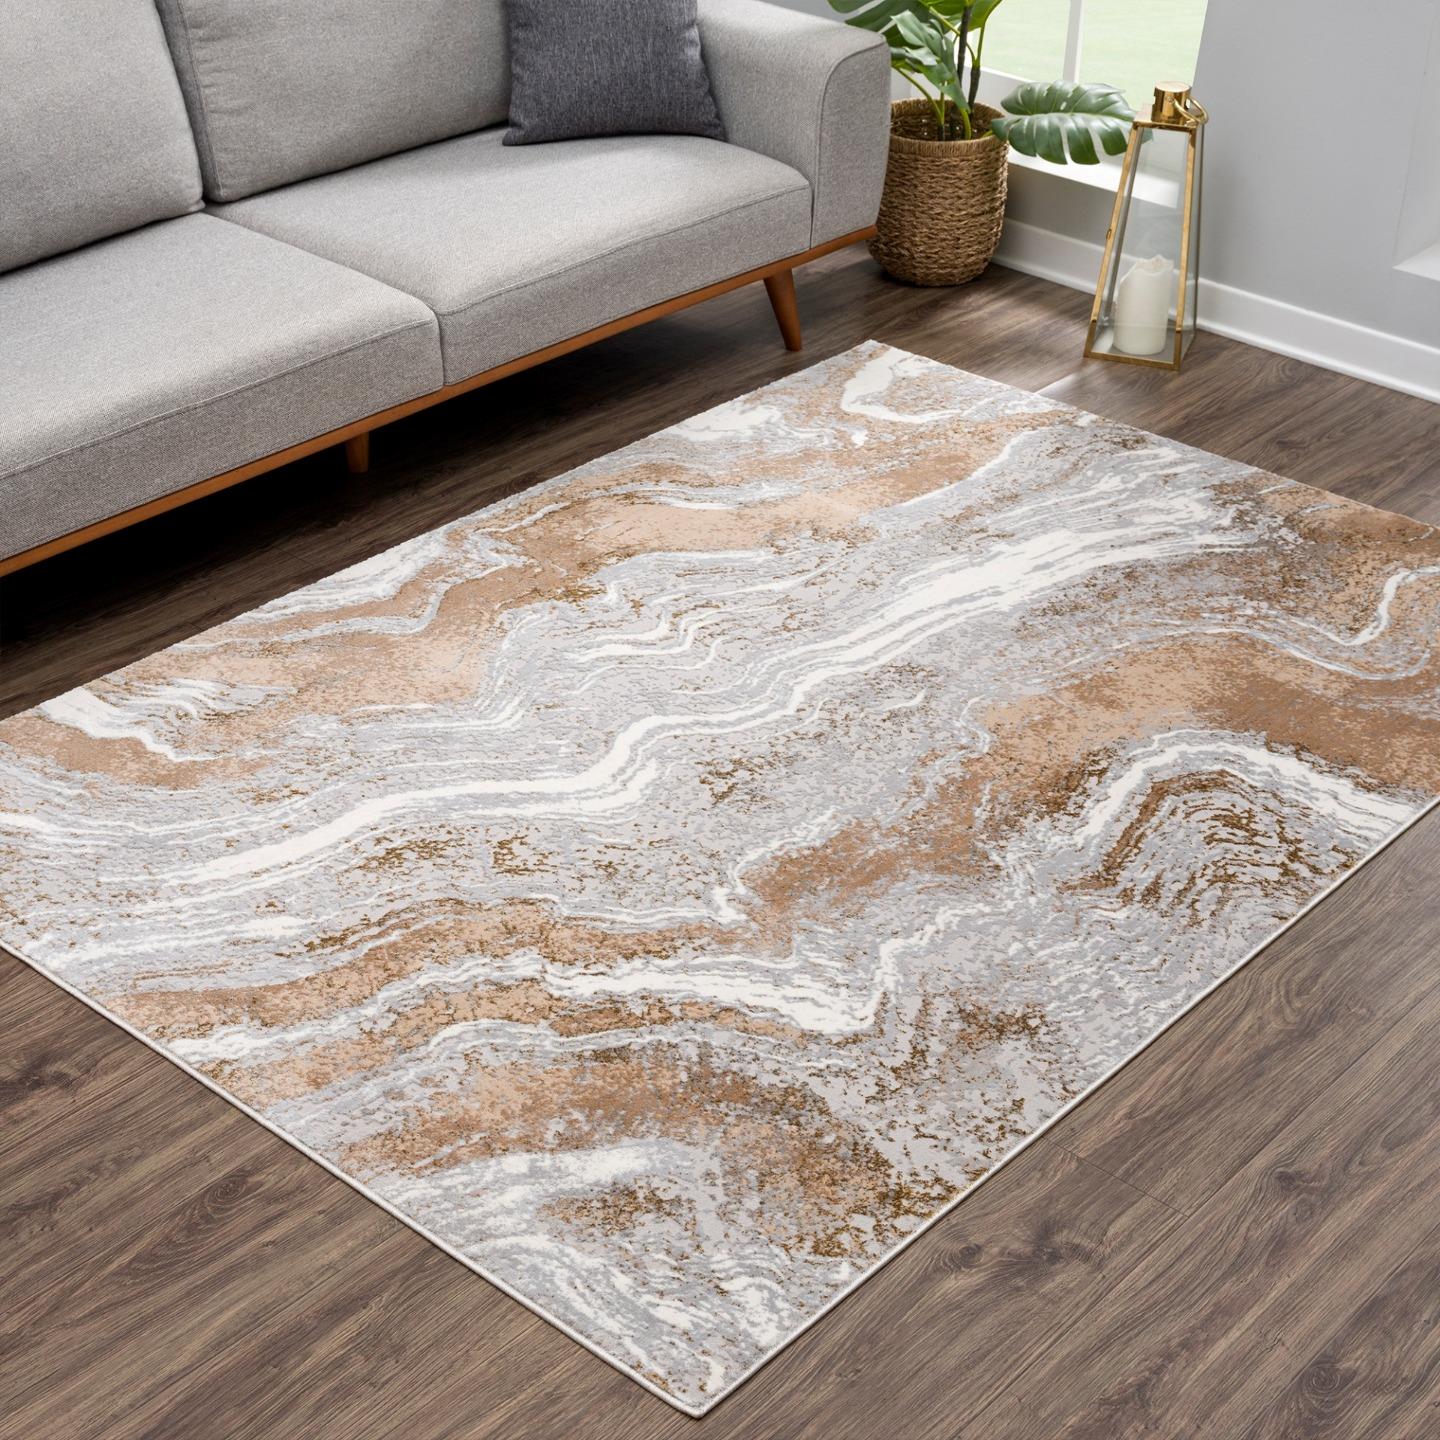 LUXE WEAVERS Marble Collection Gray 2x3 Modern Abstract Swirl Polypropylene  Area Rug 488 Gray 2x3 - The Home Depot